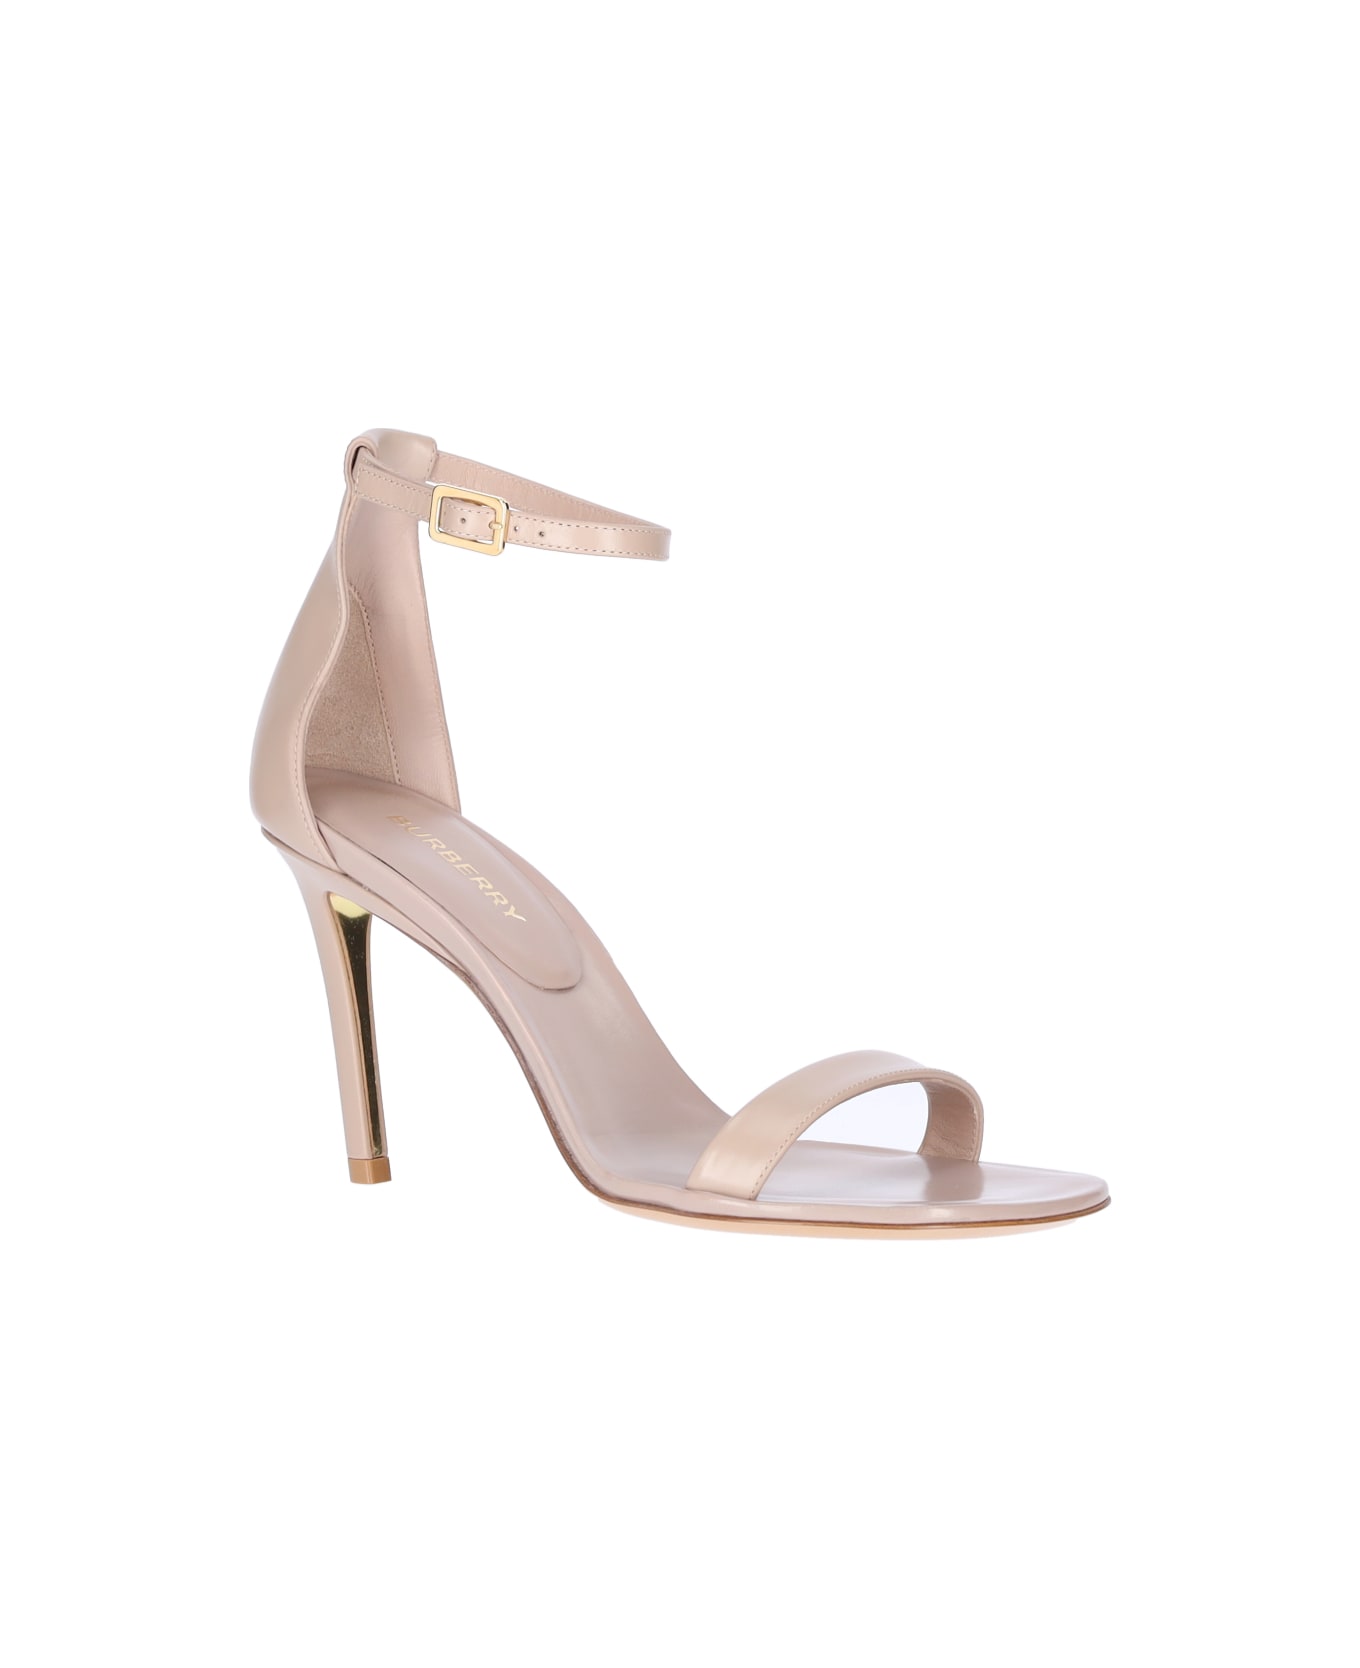 Burberry Leather Sandals - Beige